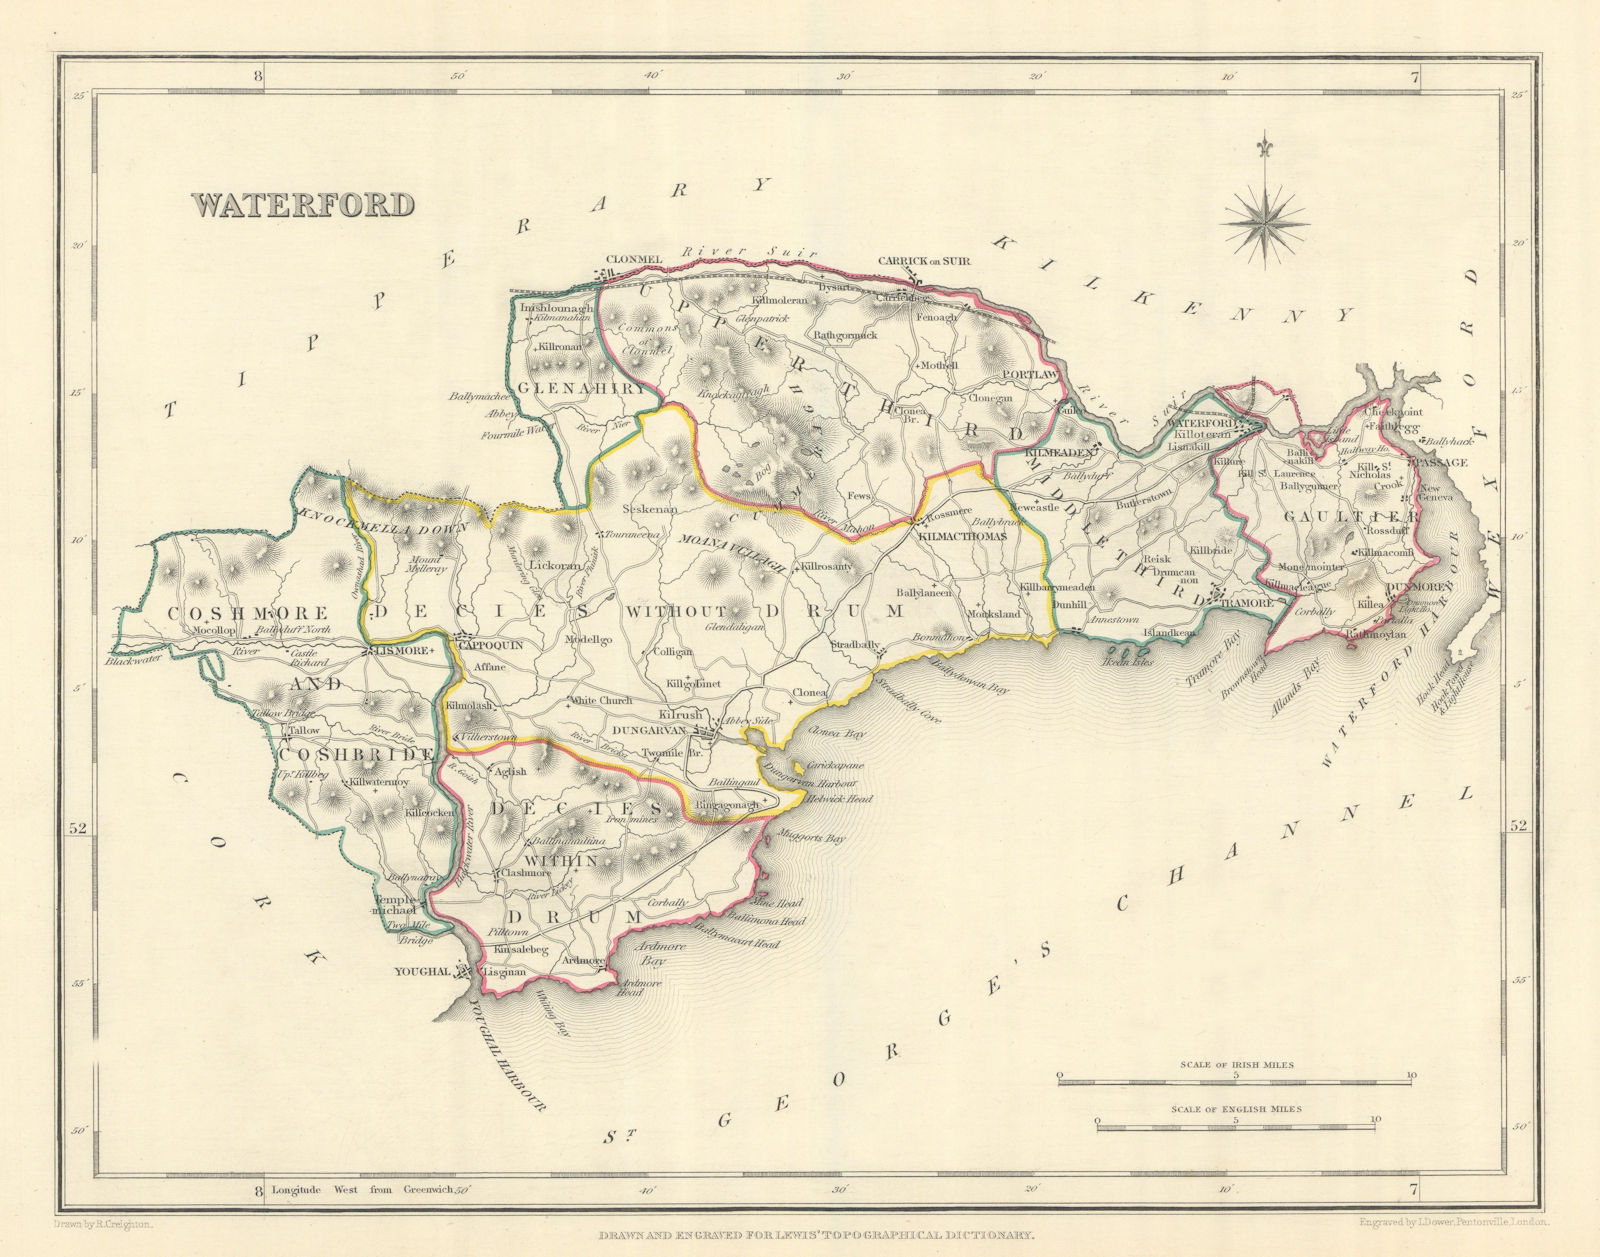 Associate Product COUNTY WATERFORD antique map for LEWIS by CREIGHTON & DOWER. Ireland 1850